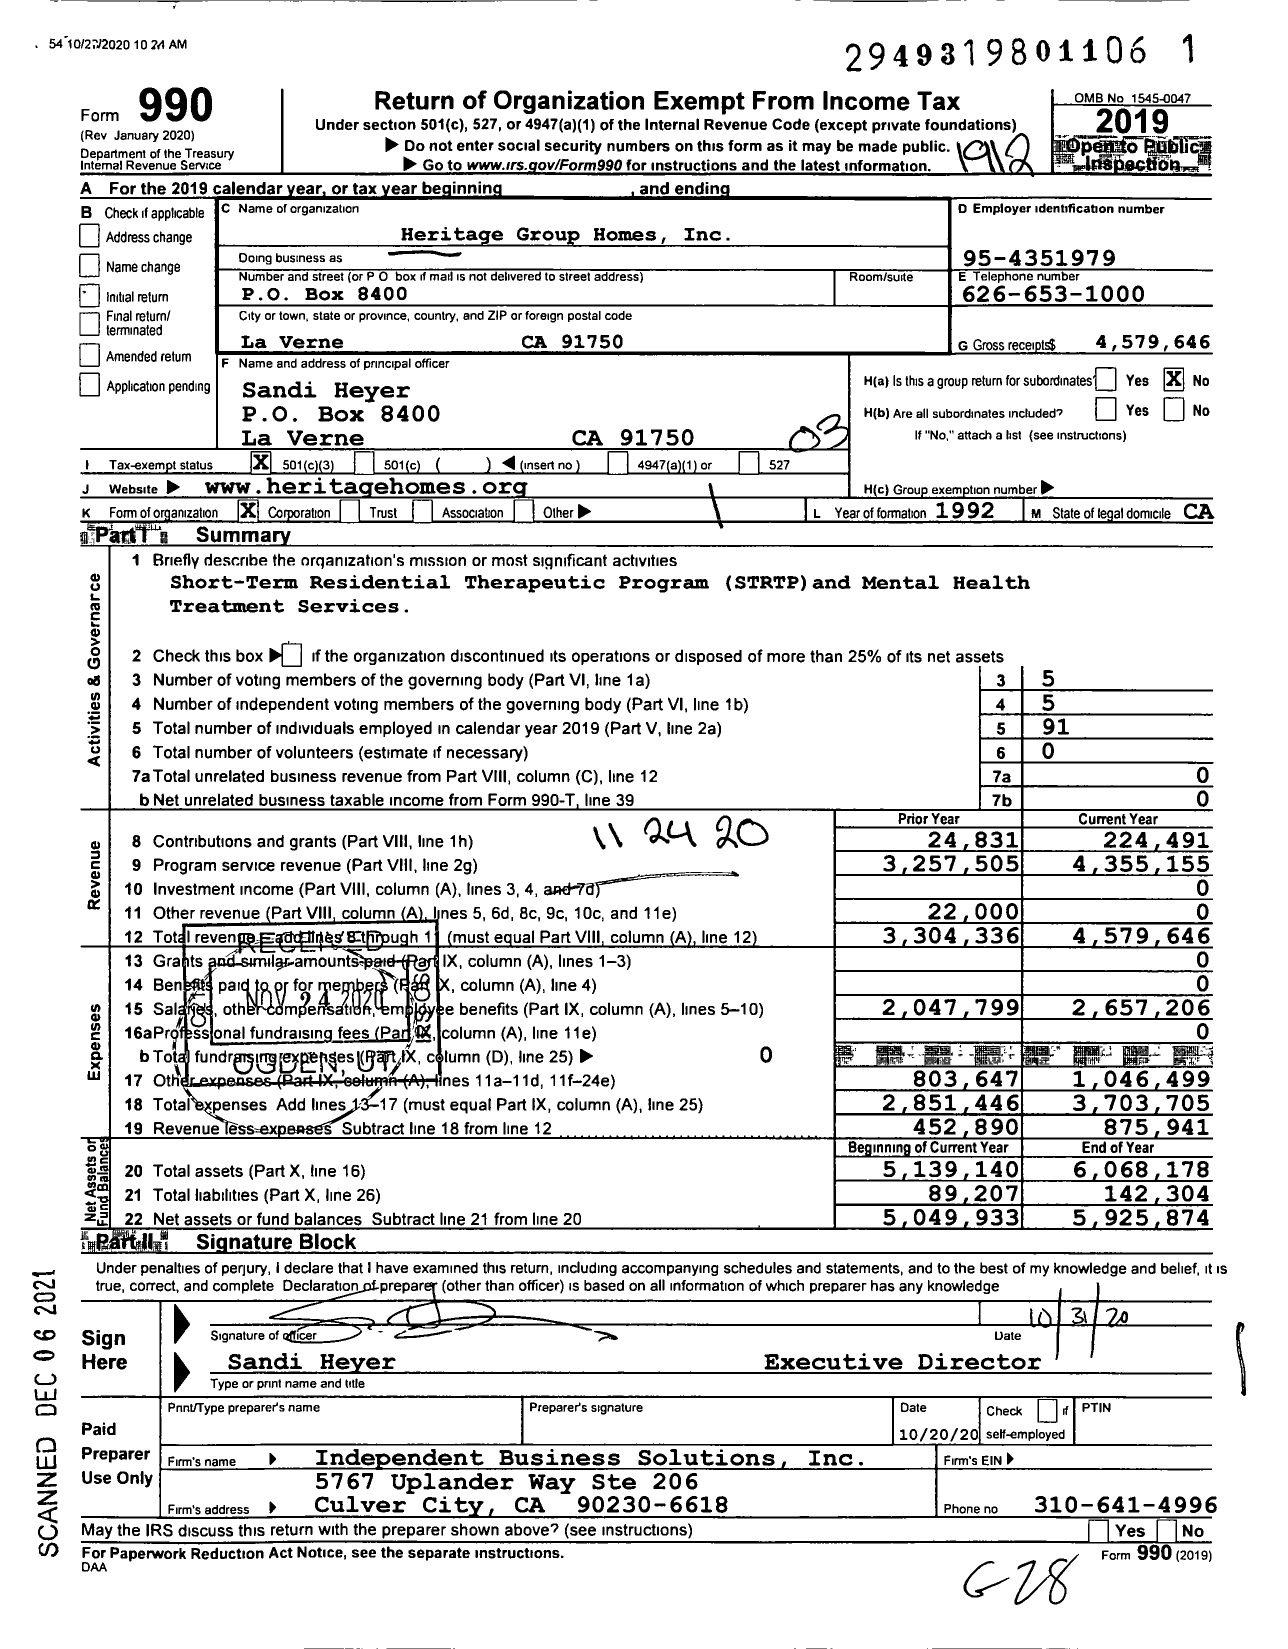 Image of first page of 2019 Form 990 for Heritage Group Homes